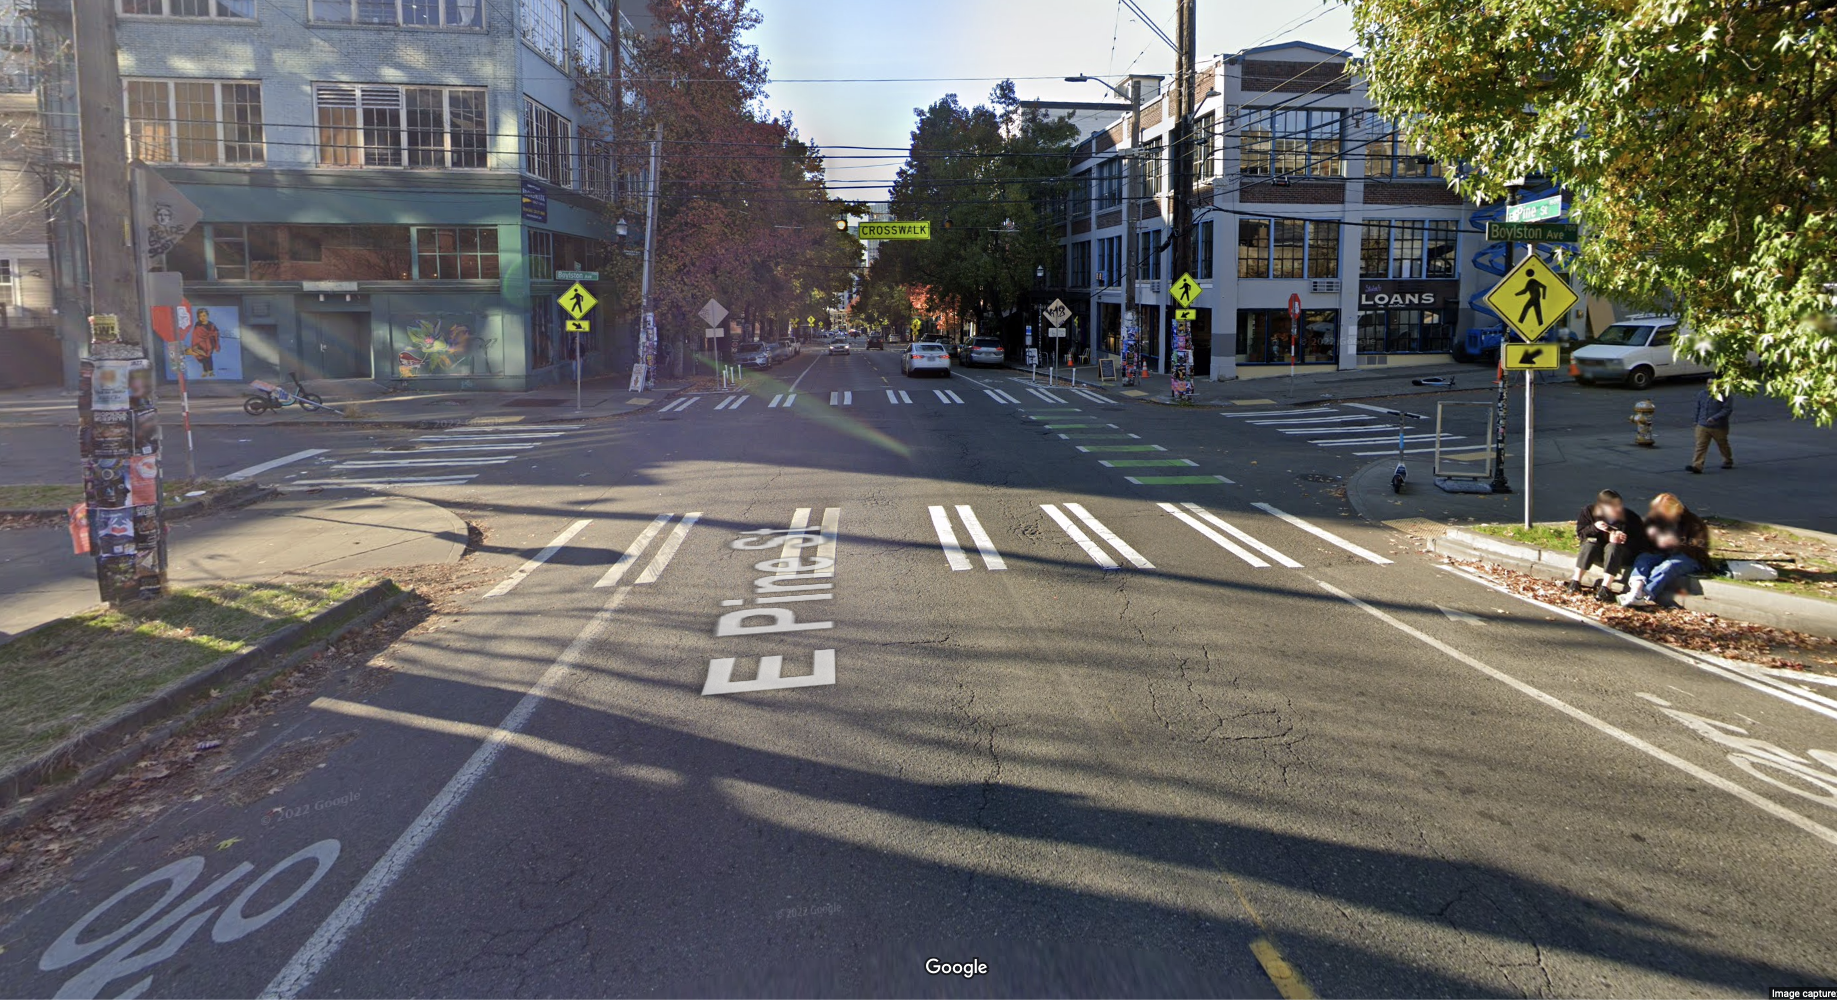 Google Street View image of Pine at Boylston, which has crosswalk signs all around it as well as a green bike lane. 